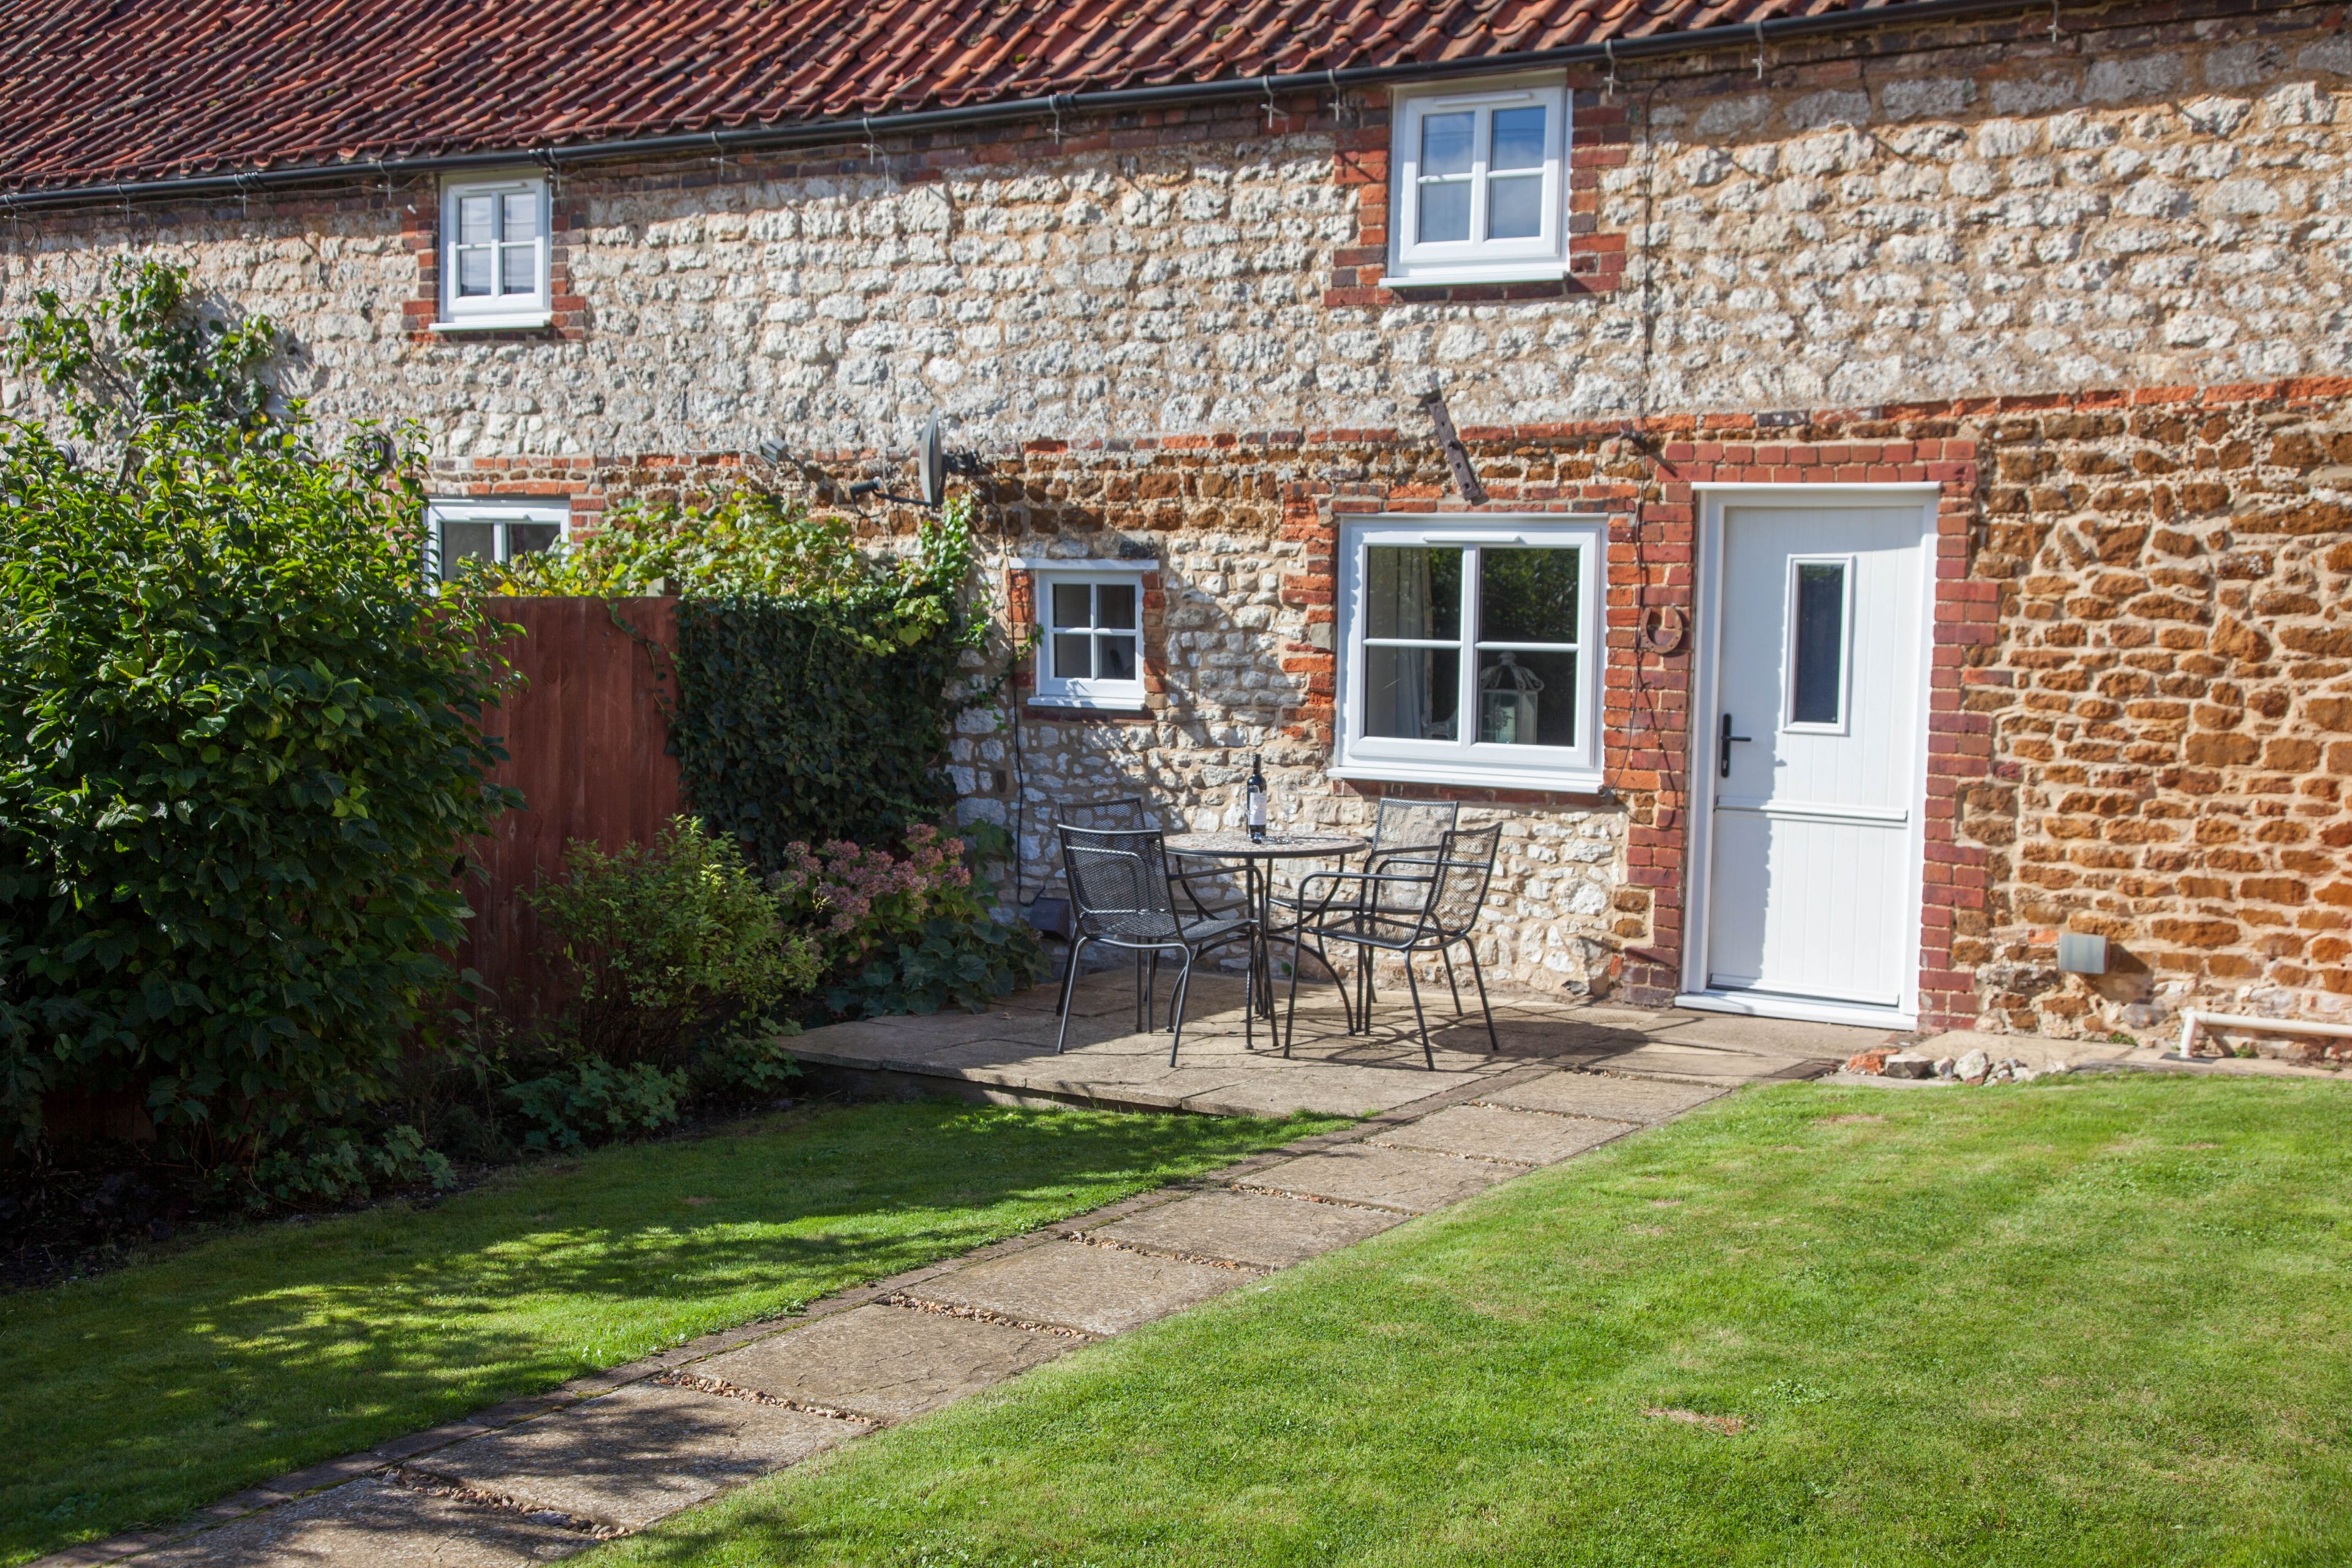 More information about Woodpecker Cottage - ideal for a family holiday